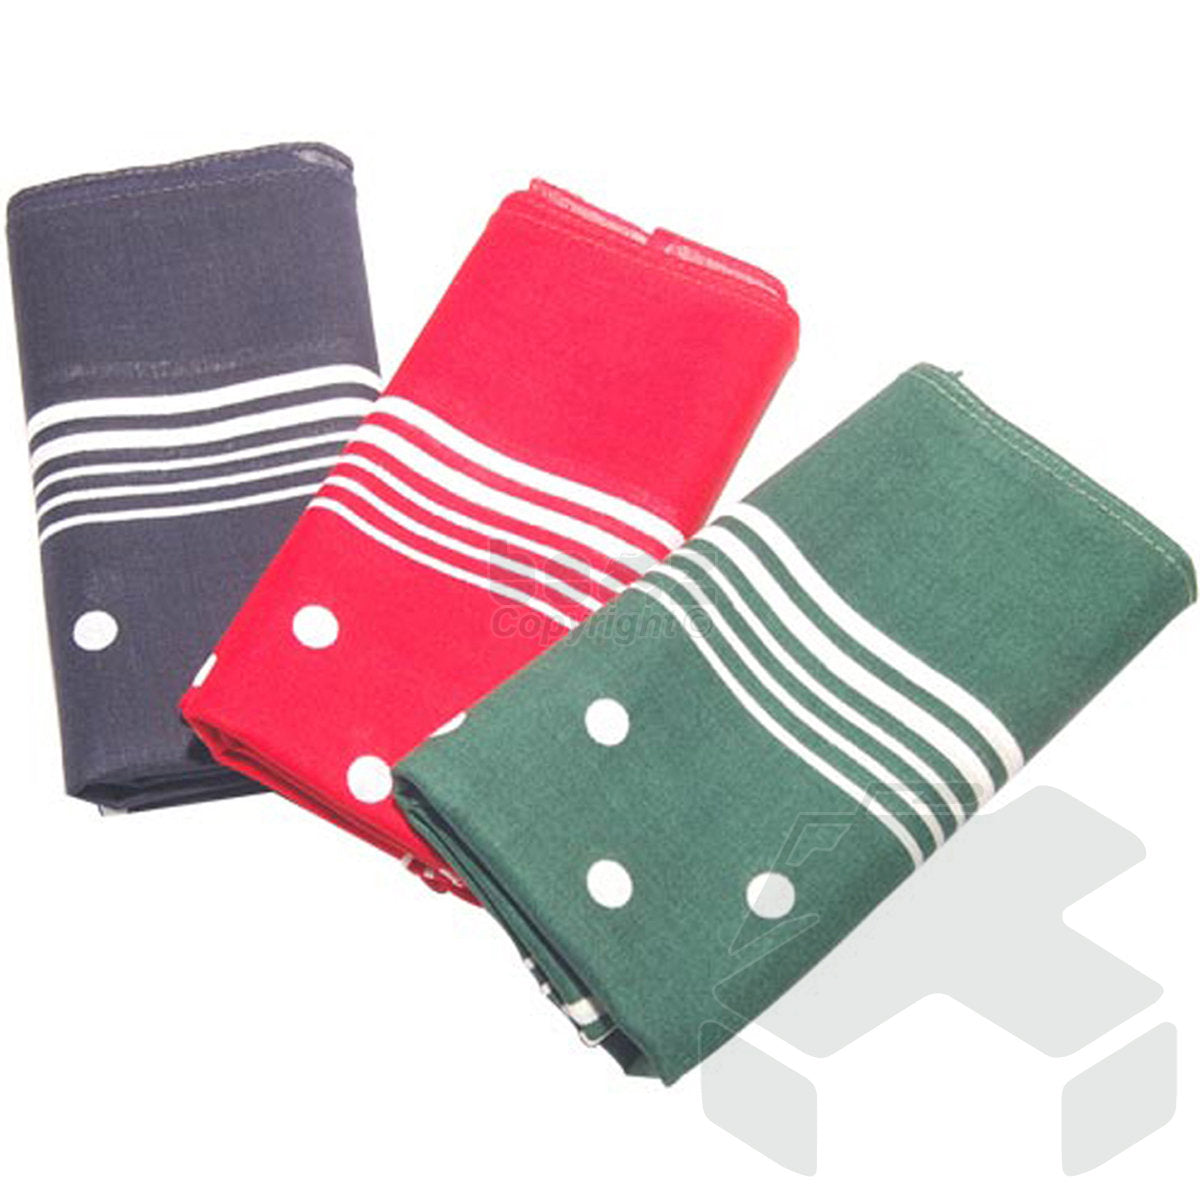 Bisley Spotted Handkerchiefs - Pack of 3 in Presentation Box